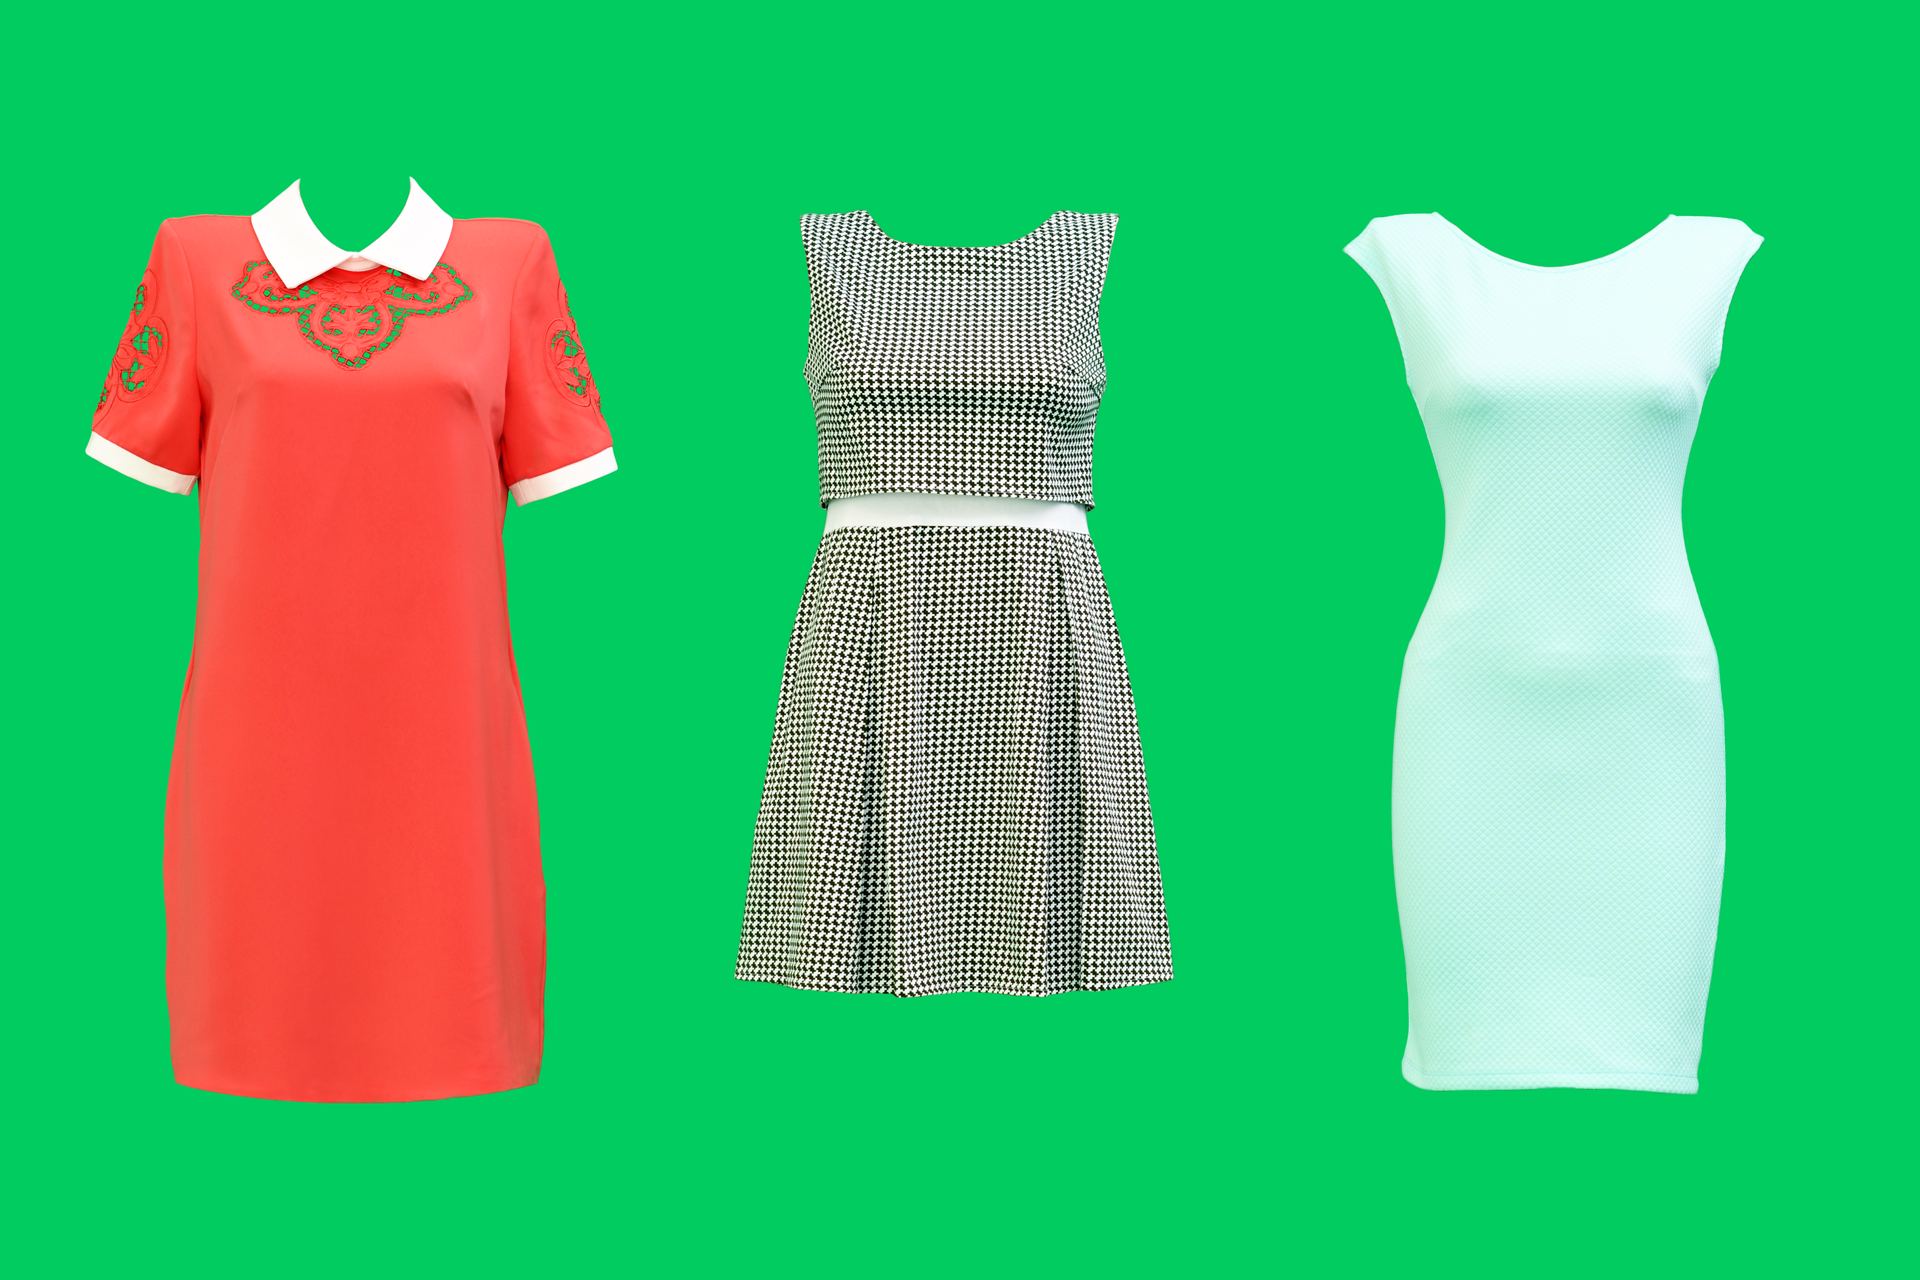 Dresses on a green background